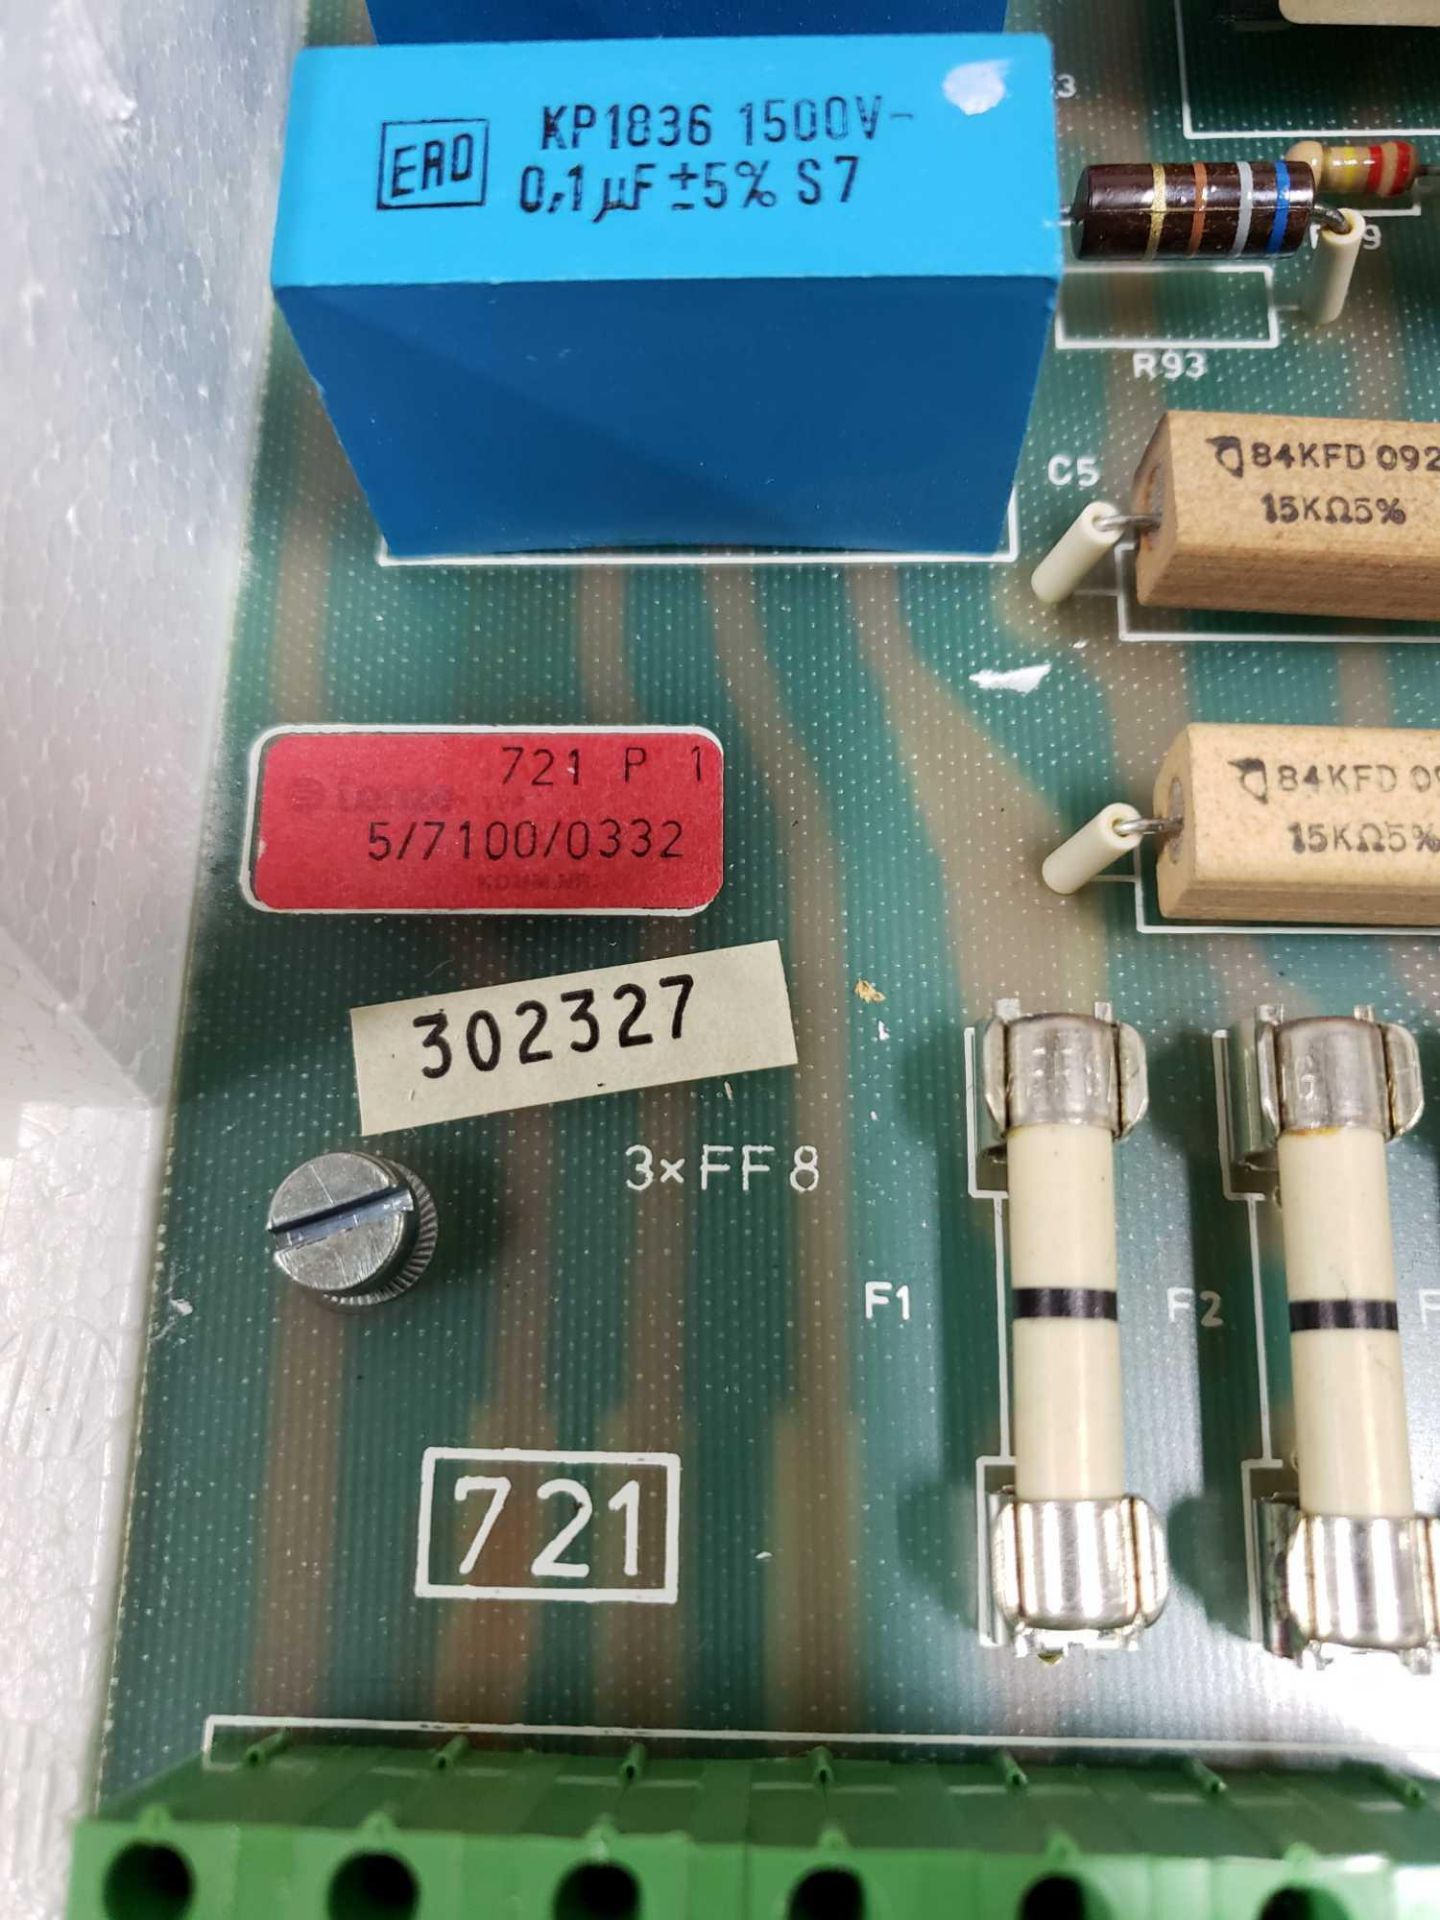 Lenze drive control board model 721. New as pictured. - Image 3 of 3